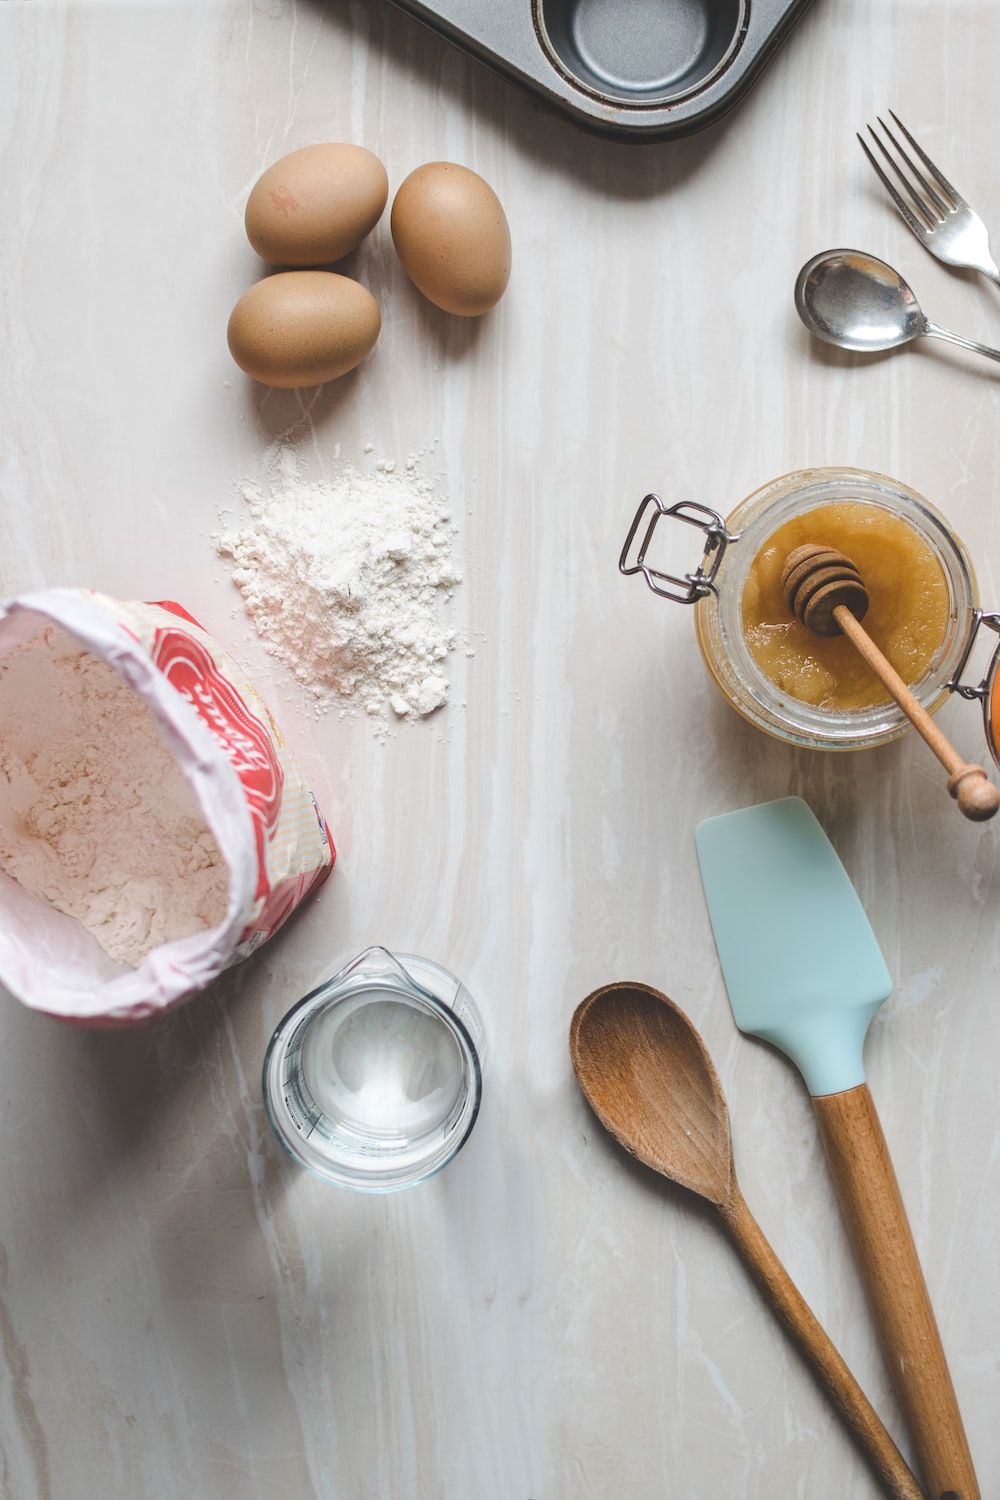 A table with eggs, flour, and other baking supplies on it. - Bakery